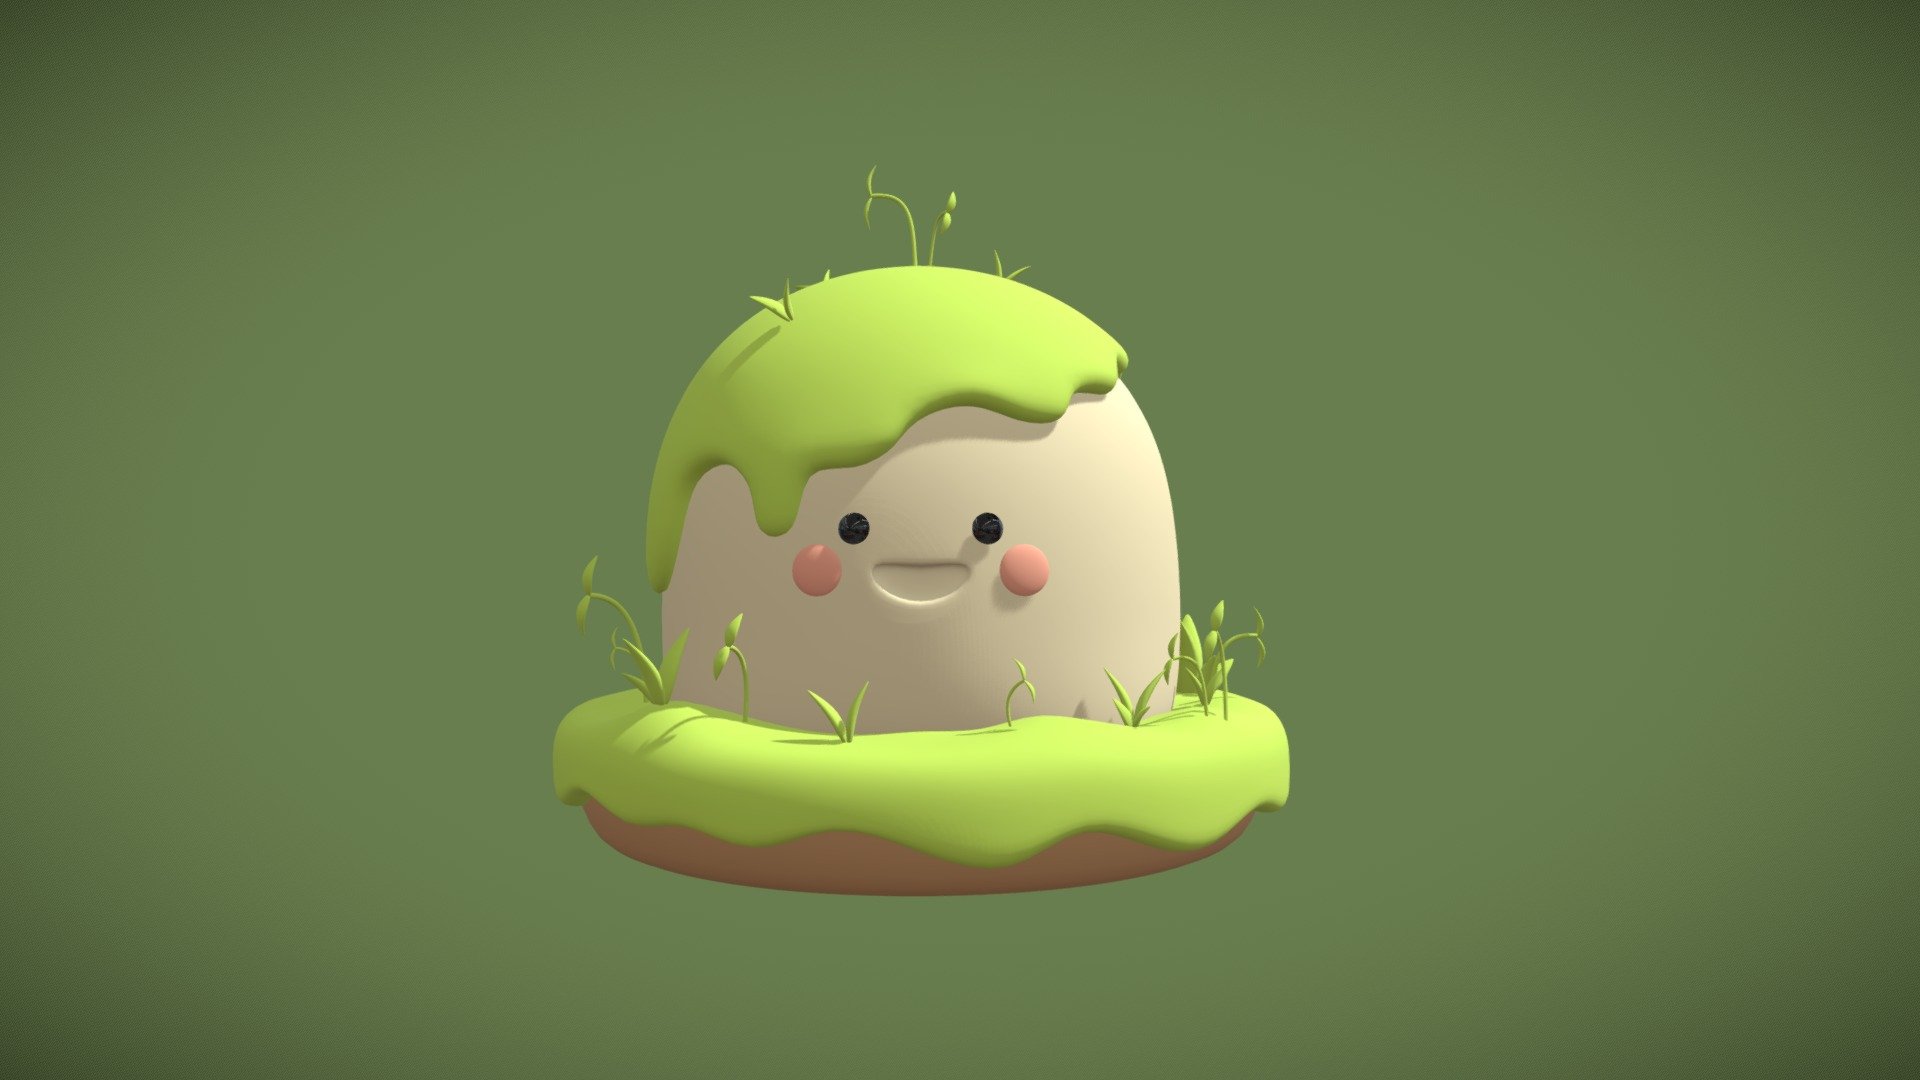 The process of modeling the Cute Character in Blender here:



https://youtu.be/6zN1aAuzuHc - Cute Character - Download Free 3D model by Starkosha 3d model